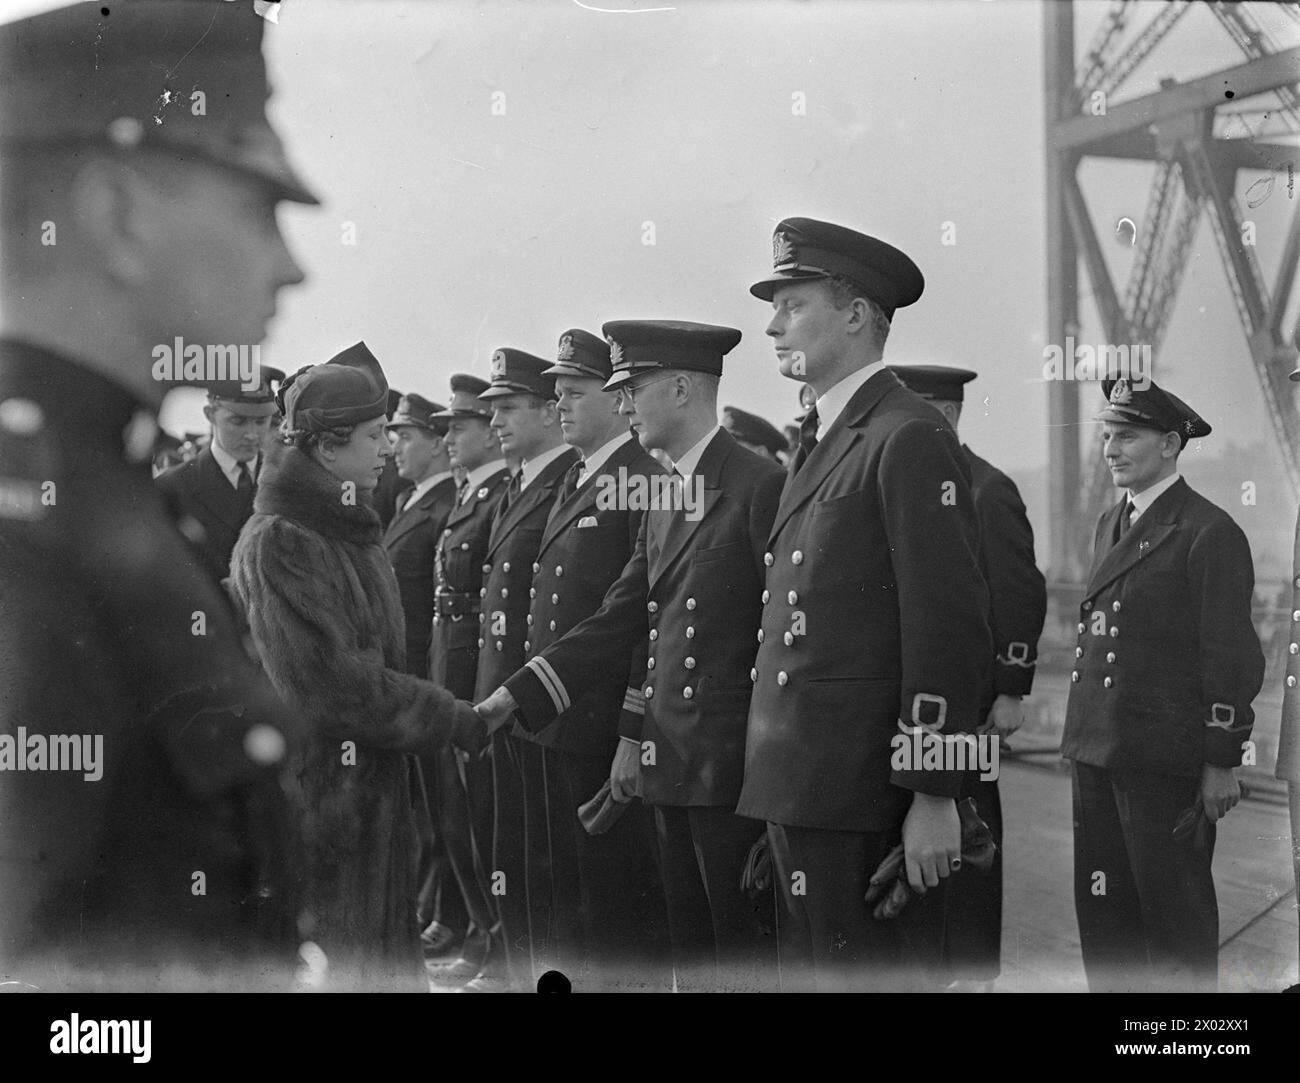 HRH THE PRINCESS ROYAL VISITS ROSYTH AND INSPECTS HMS PRINCE OF WALES. 1941. - The Princess Royal shaking hands with officers during her visit to HMS PRINCE OF WALES at Rosyth Stock Photo